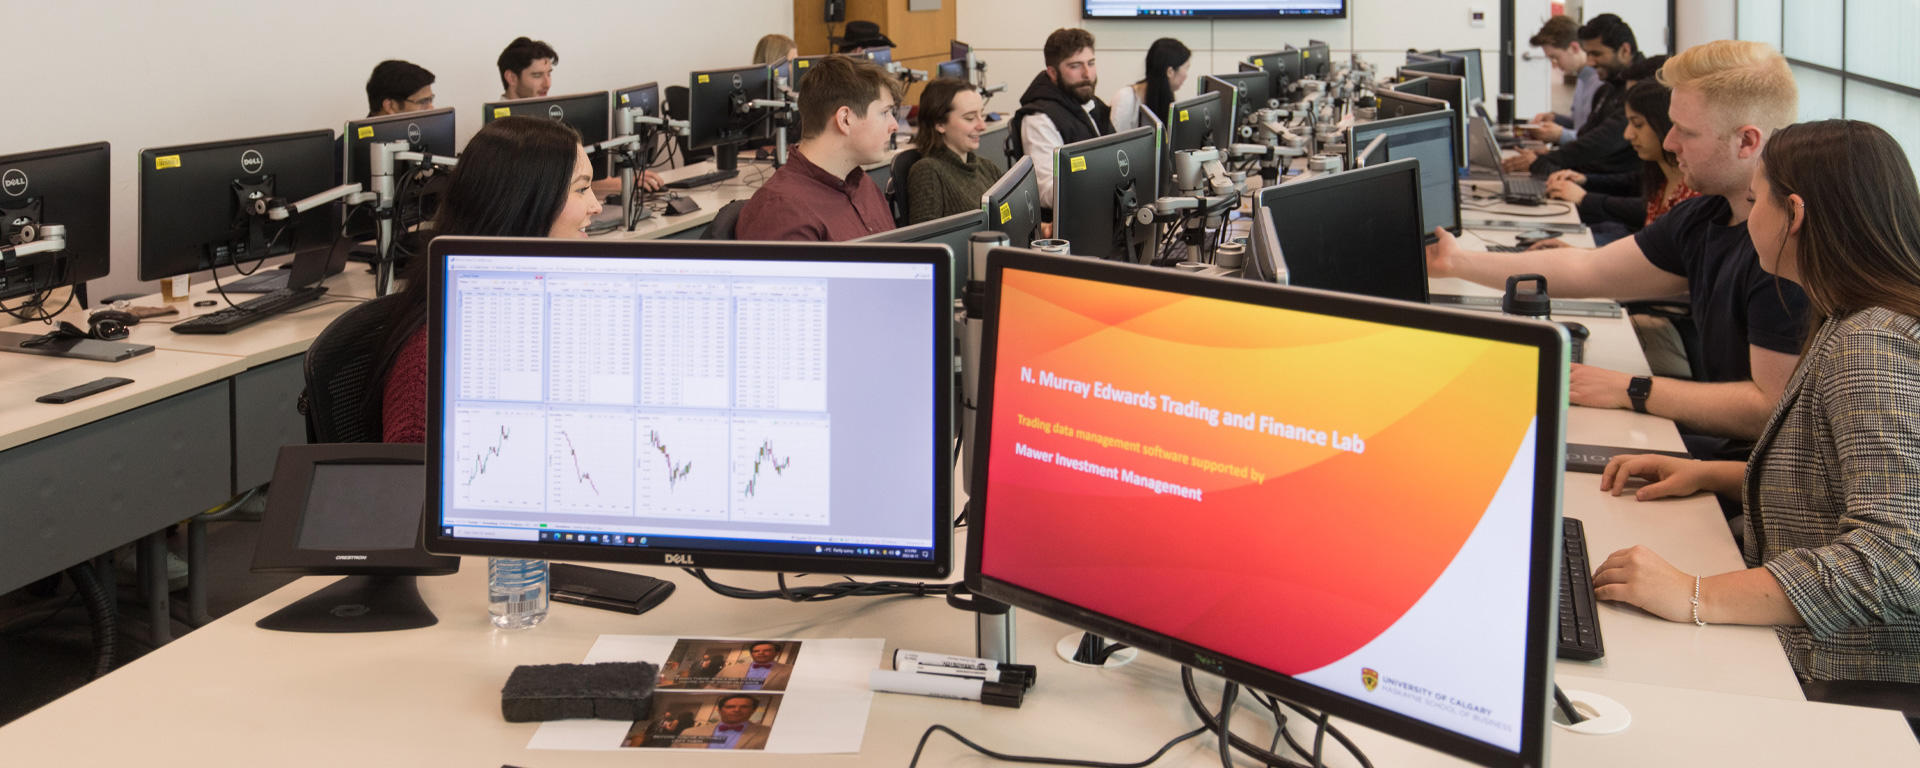 N. Murray Edwards Trading and Finance Lab